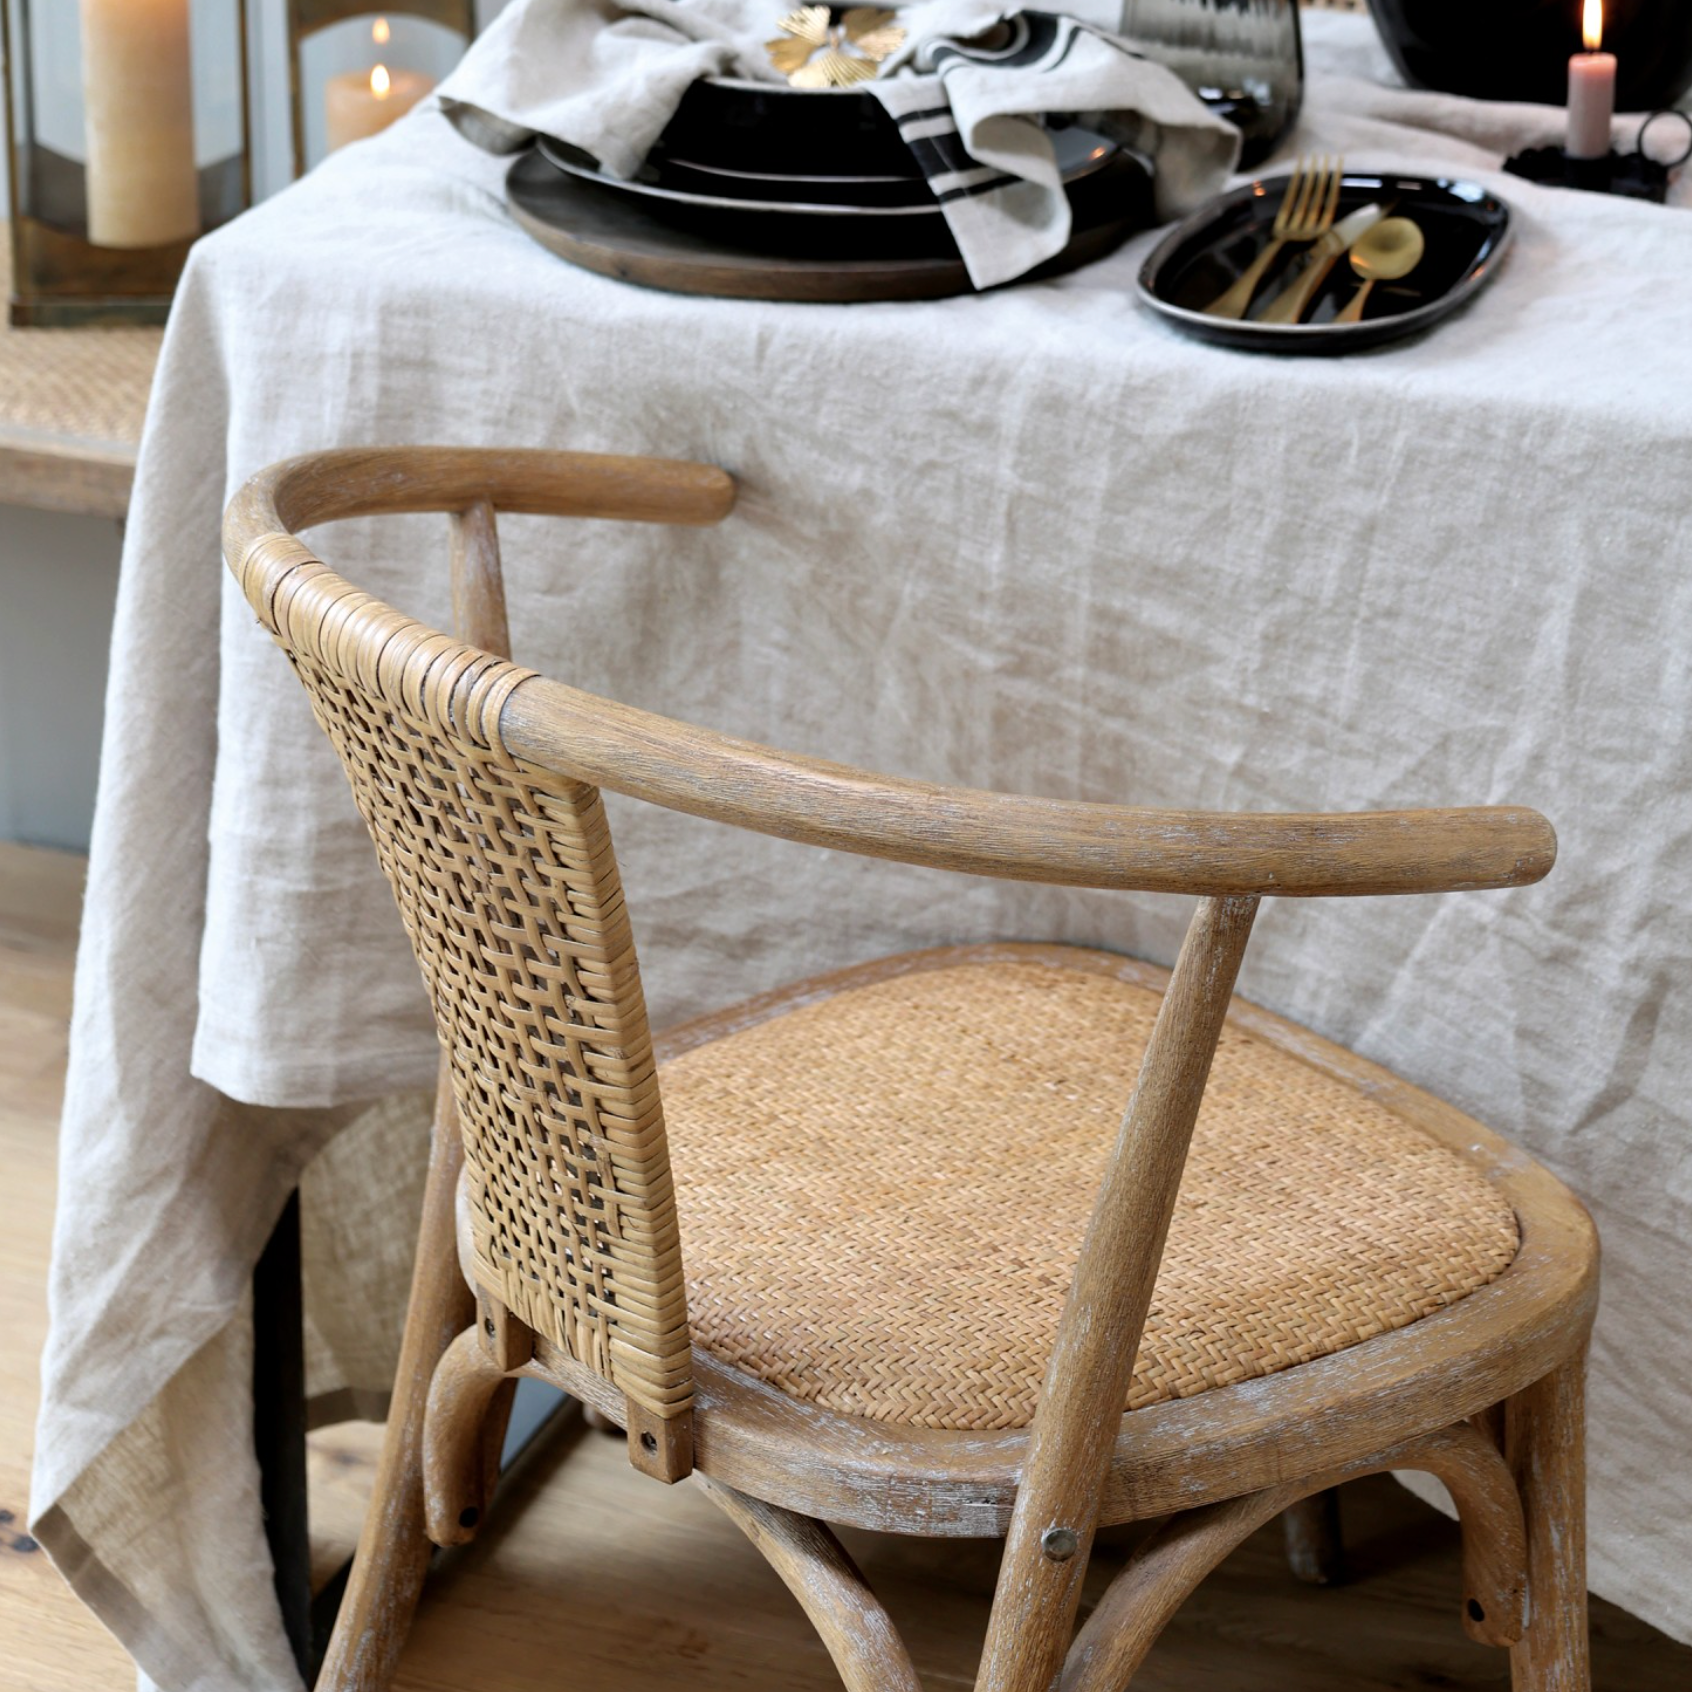 wicker backed dining chairs at table.